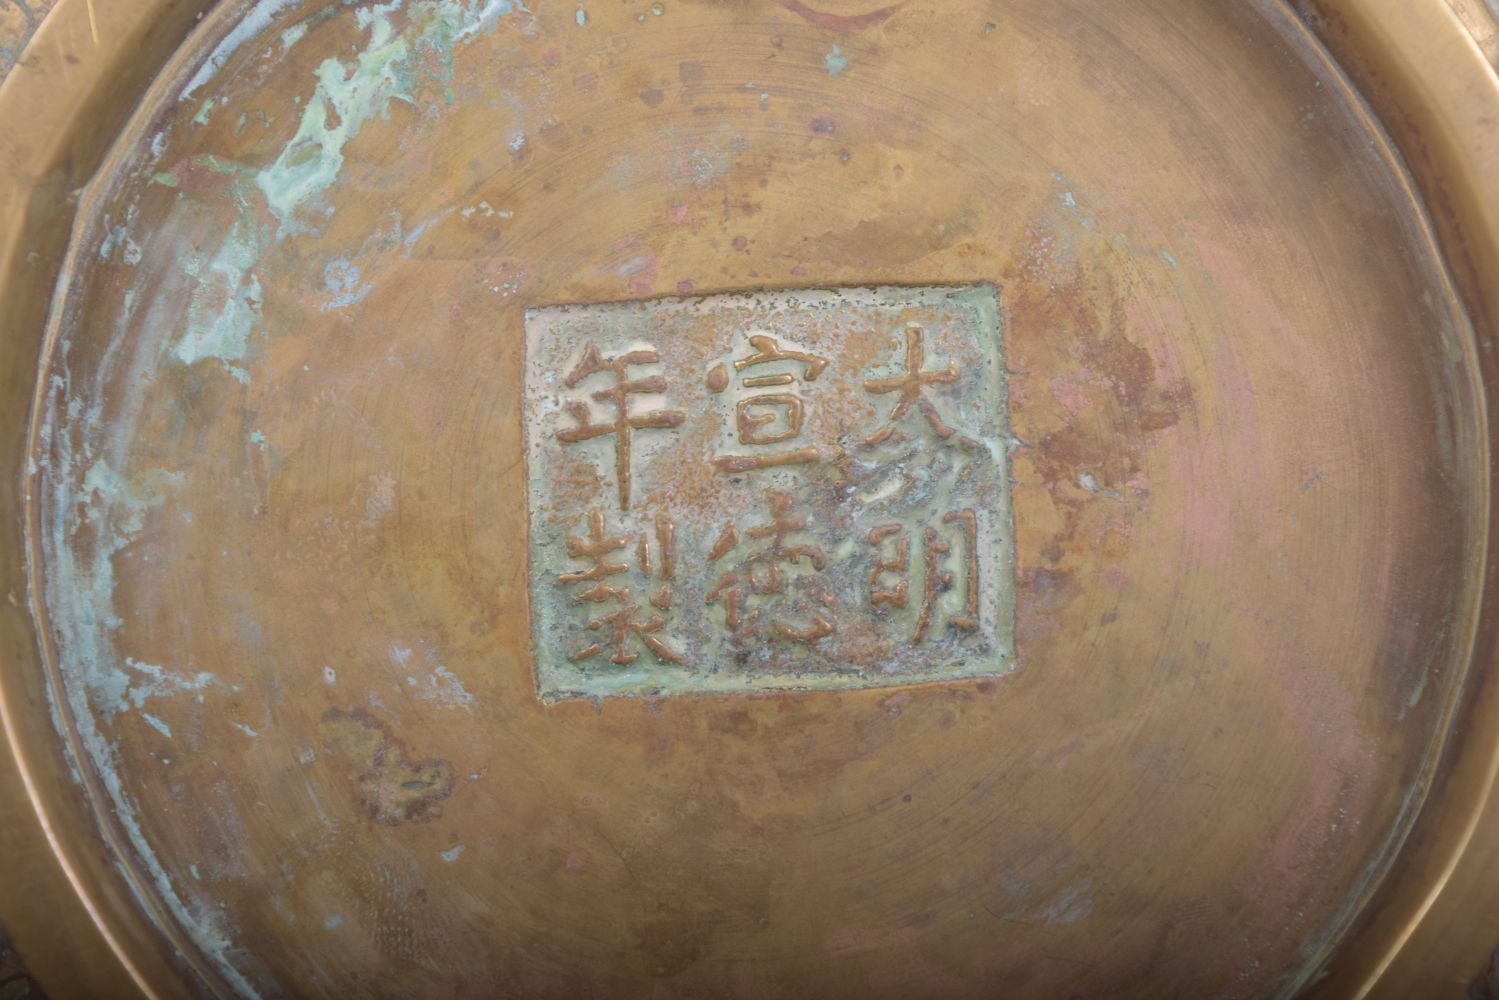 A CHINESE EMBOSSED AND CHASED BRONZE BOWL, with scenes of men on horseback in outdoor settings, - Image 7 of 7